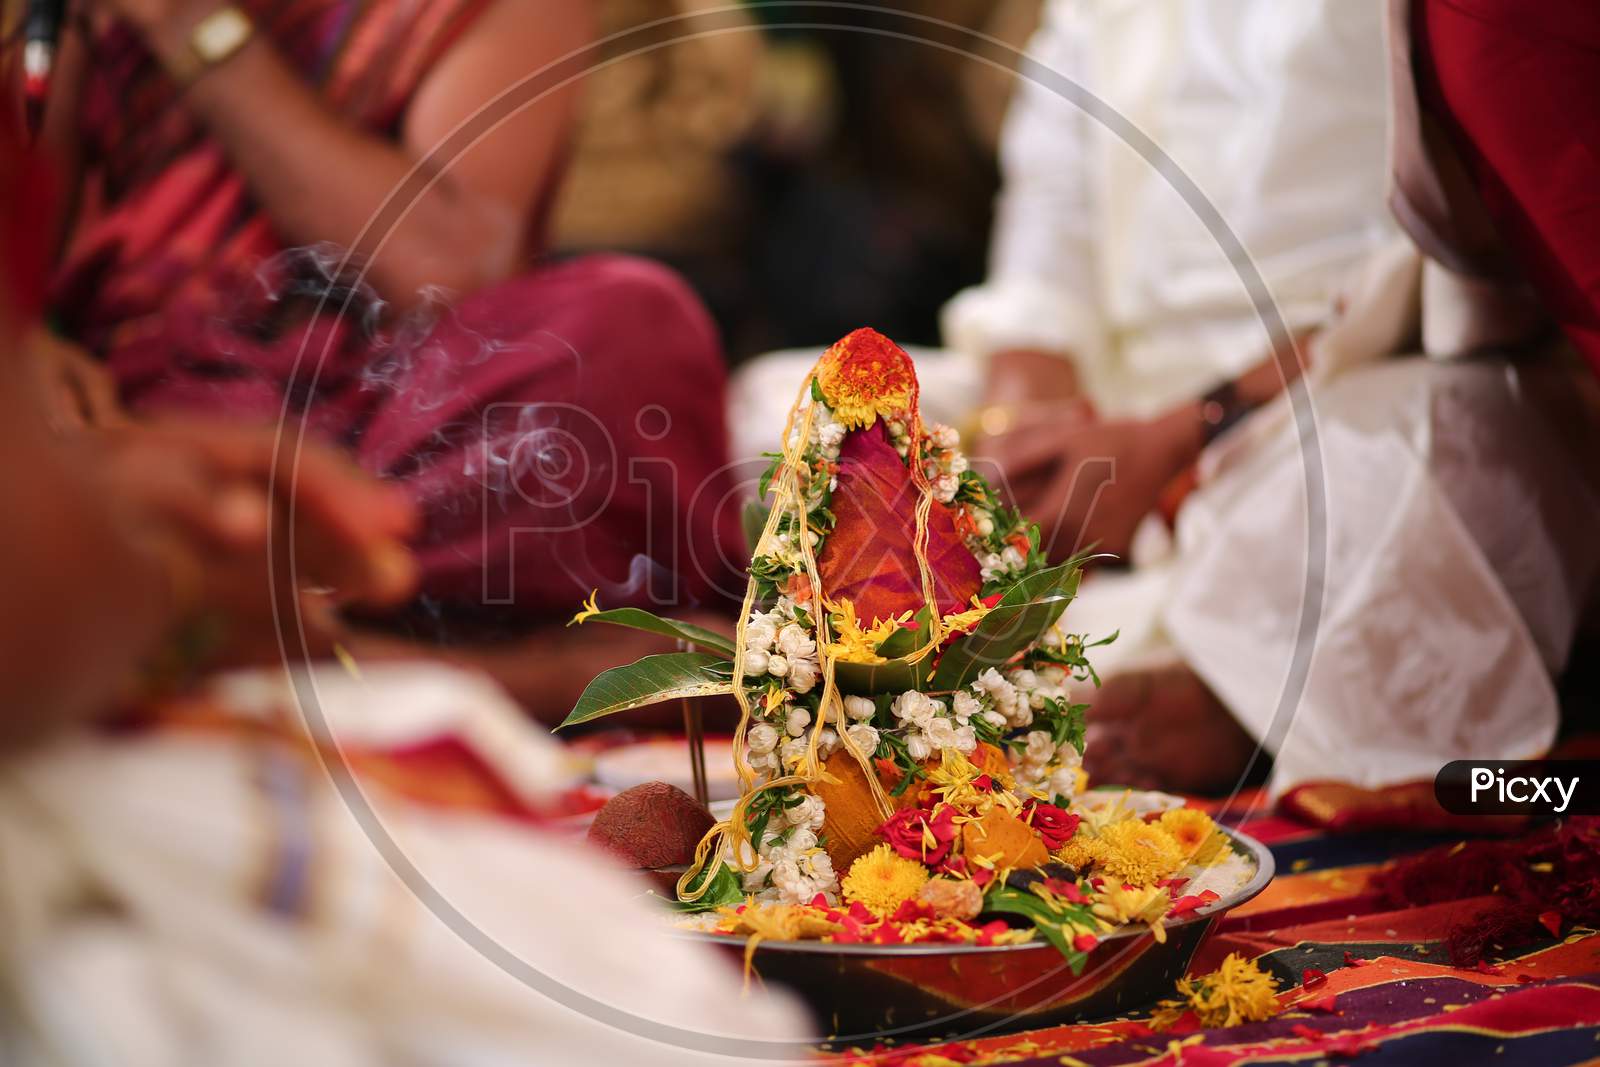 Mangalsutra puja during a wedding